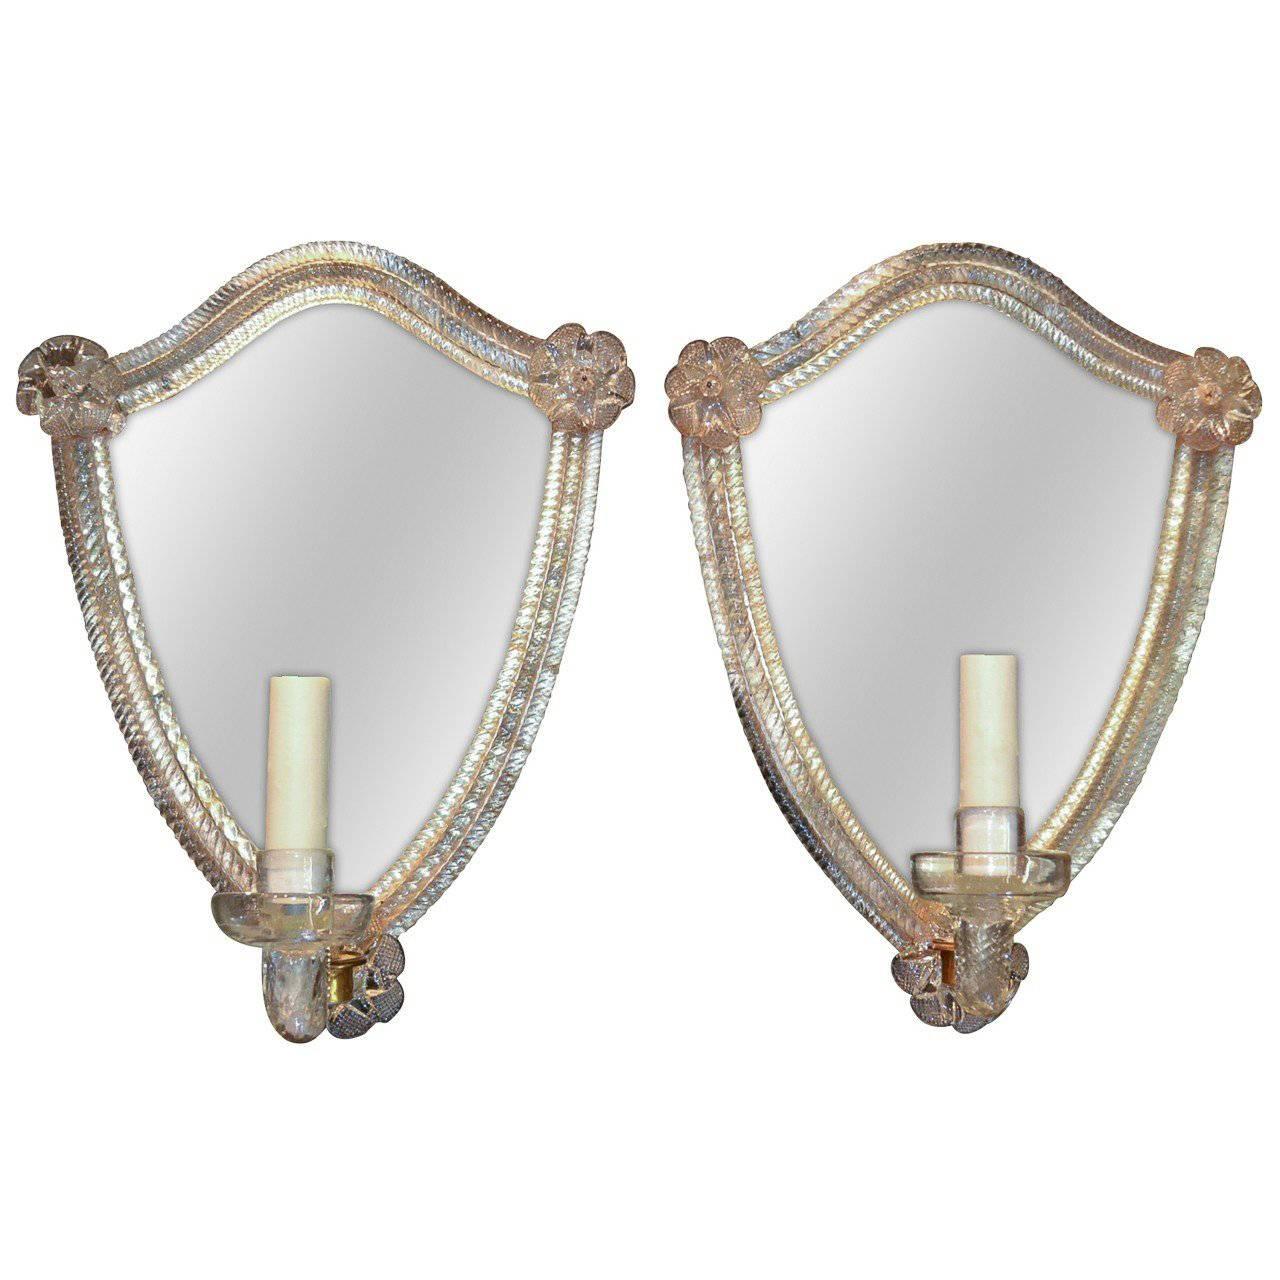 Pair of Venetian One Arm Etched Mirror Sconces